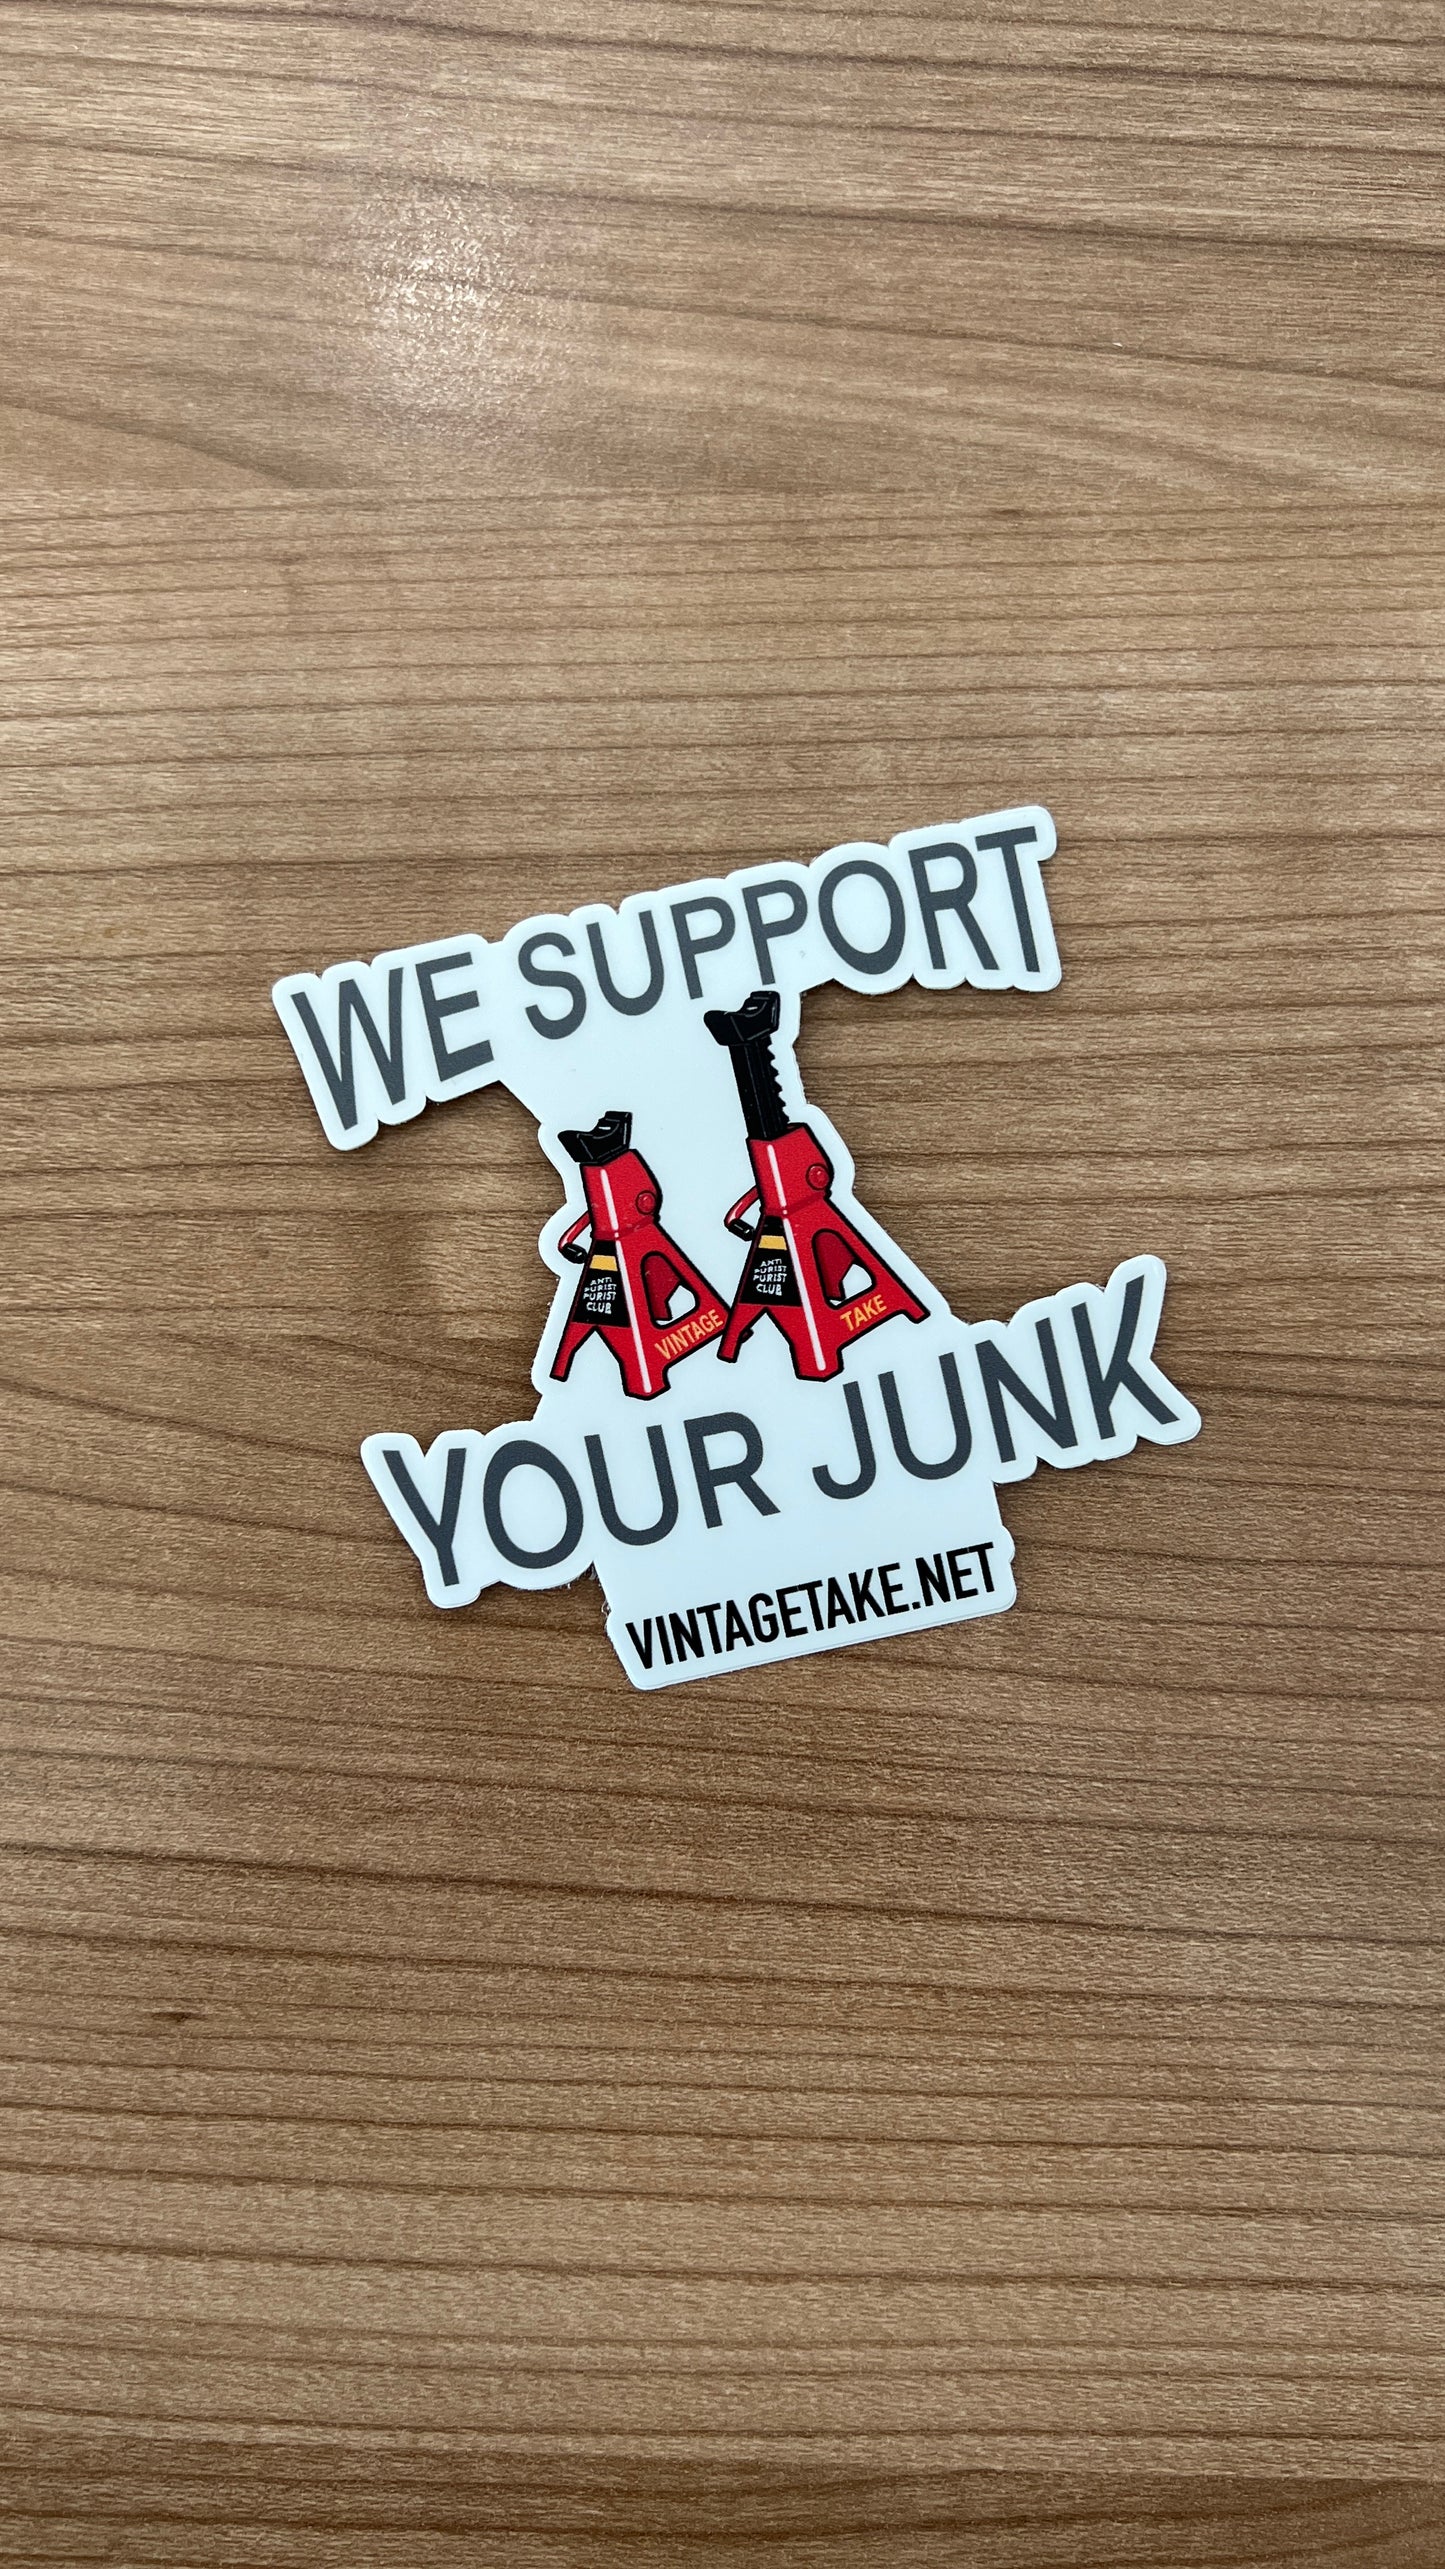 We support your junk